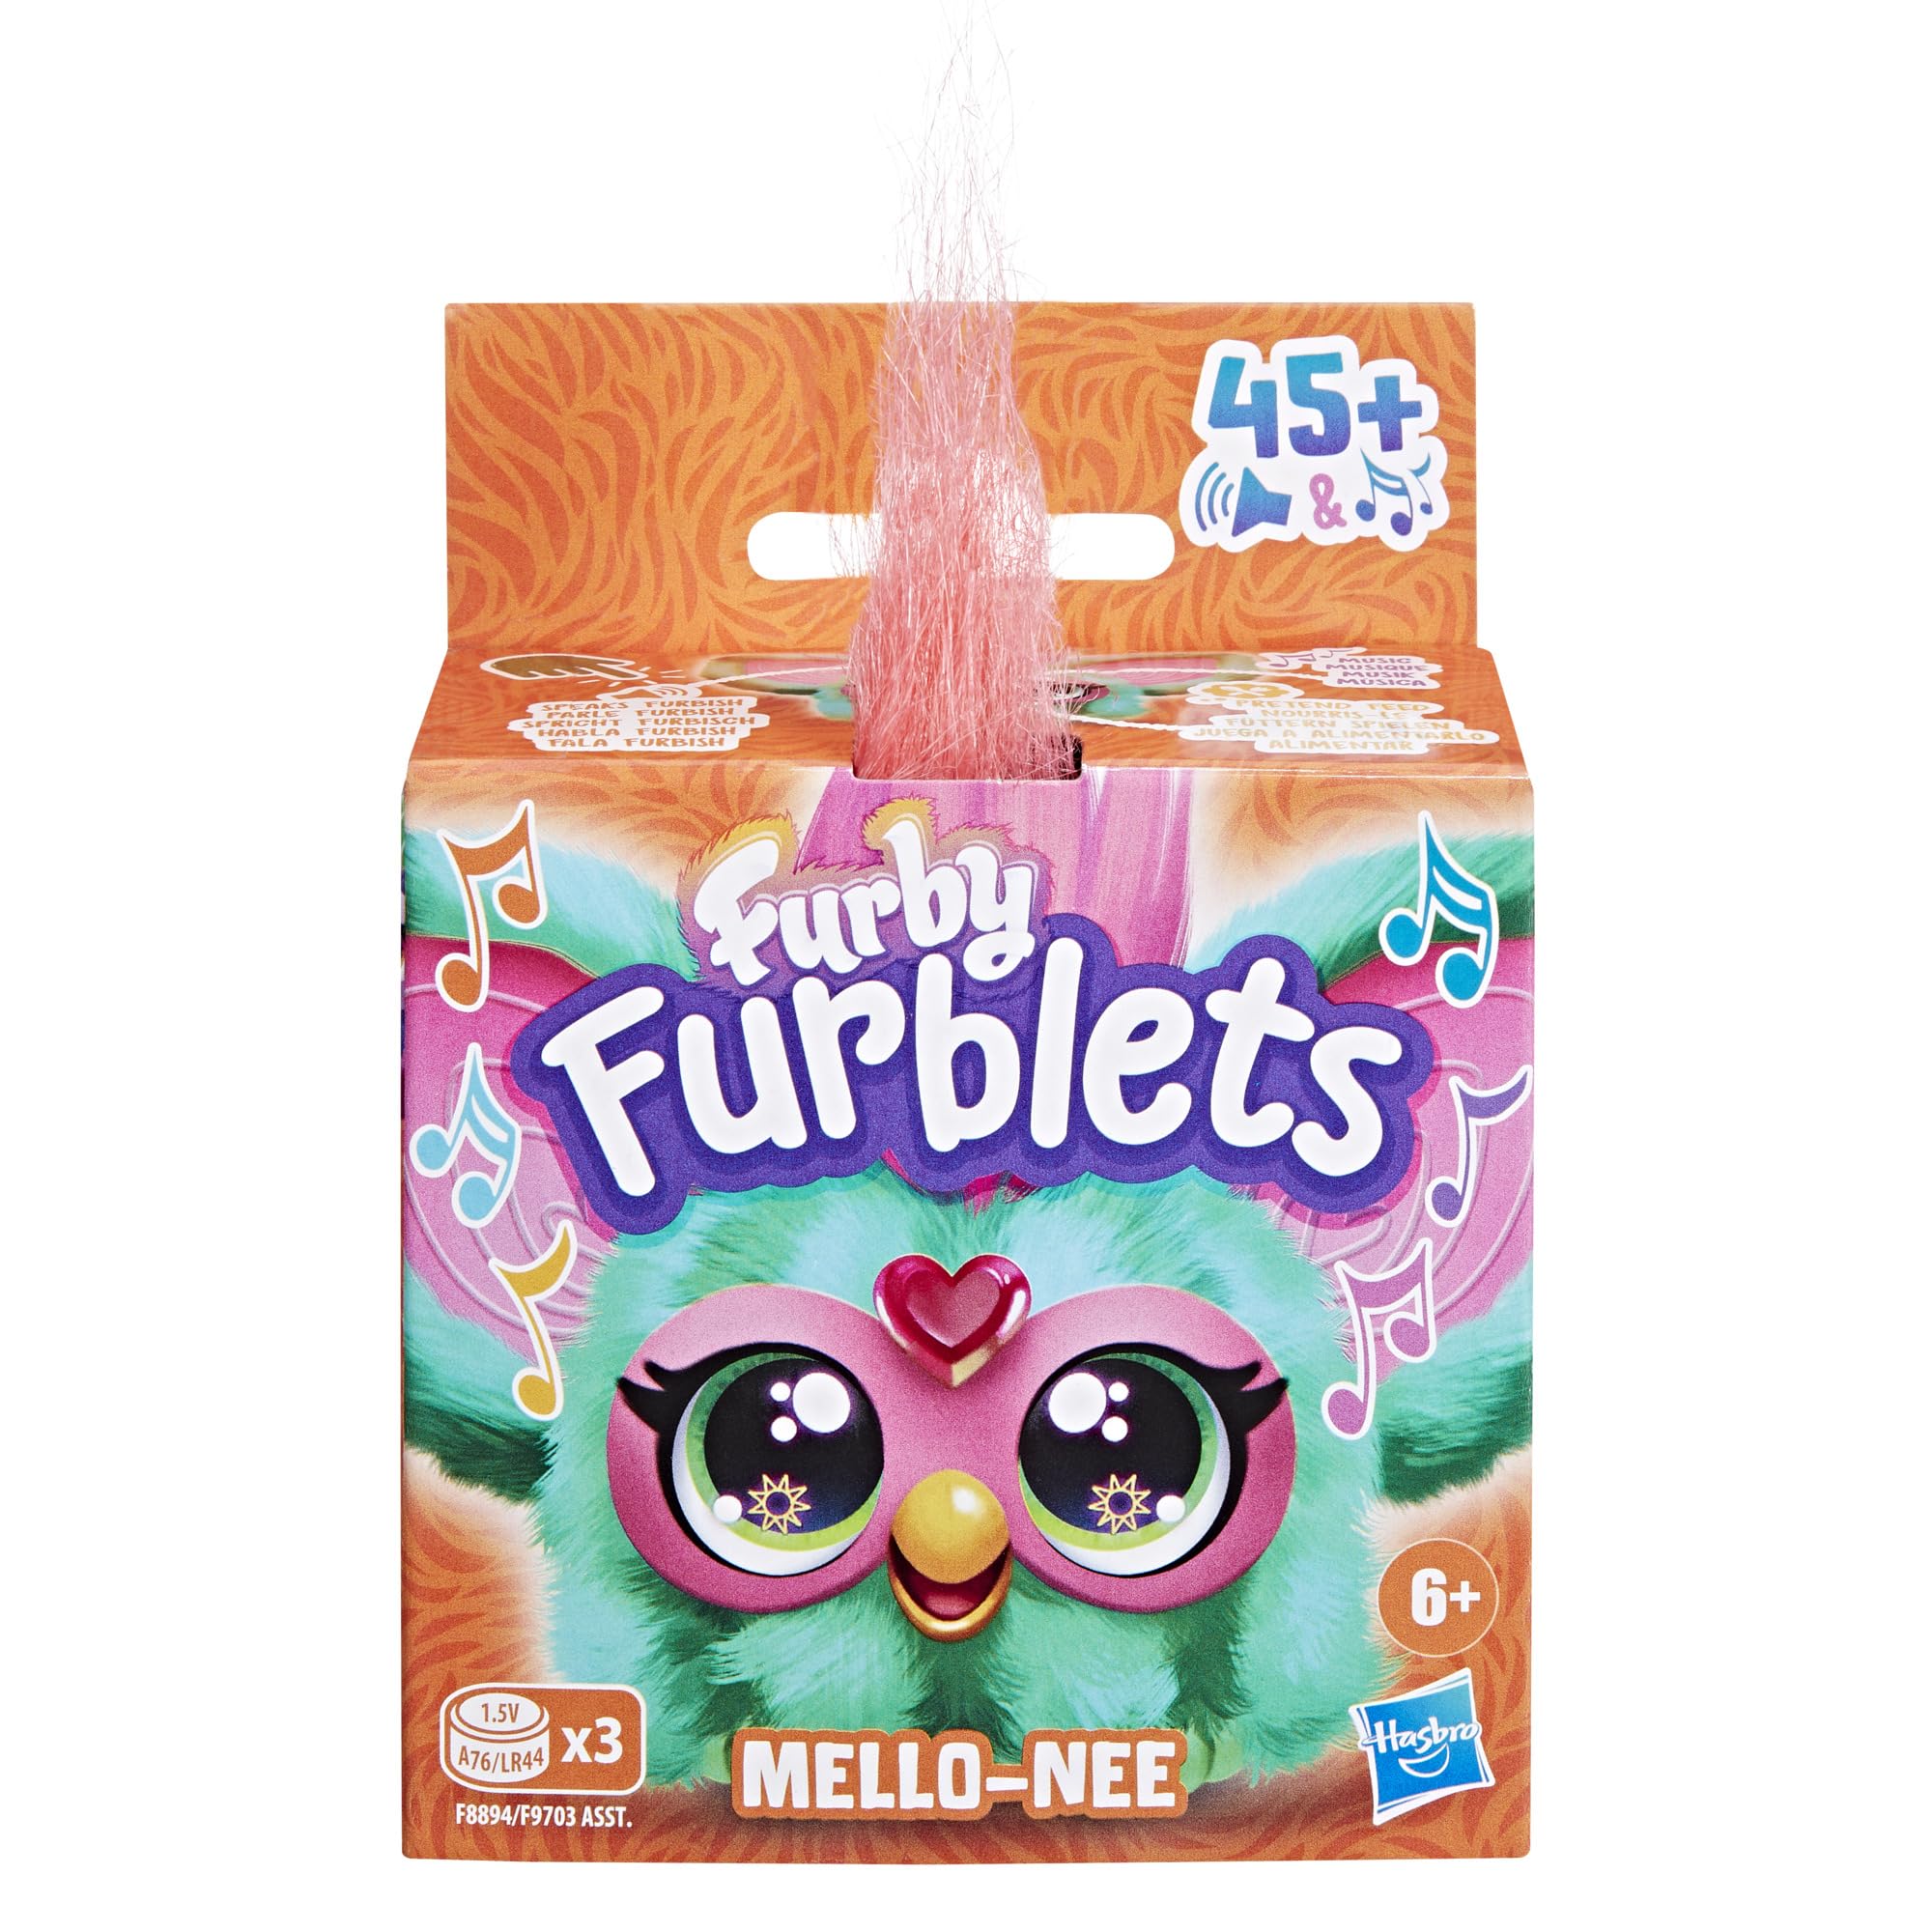 Furby Furblets Mello-Nee Mini Friend, 45+ Sounds, Summer Chill Music & Furbish Phrases, Electronic Plush Toys for Girls & Boys 6 Years & Up, Watermelon Red & Green